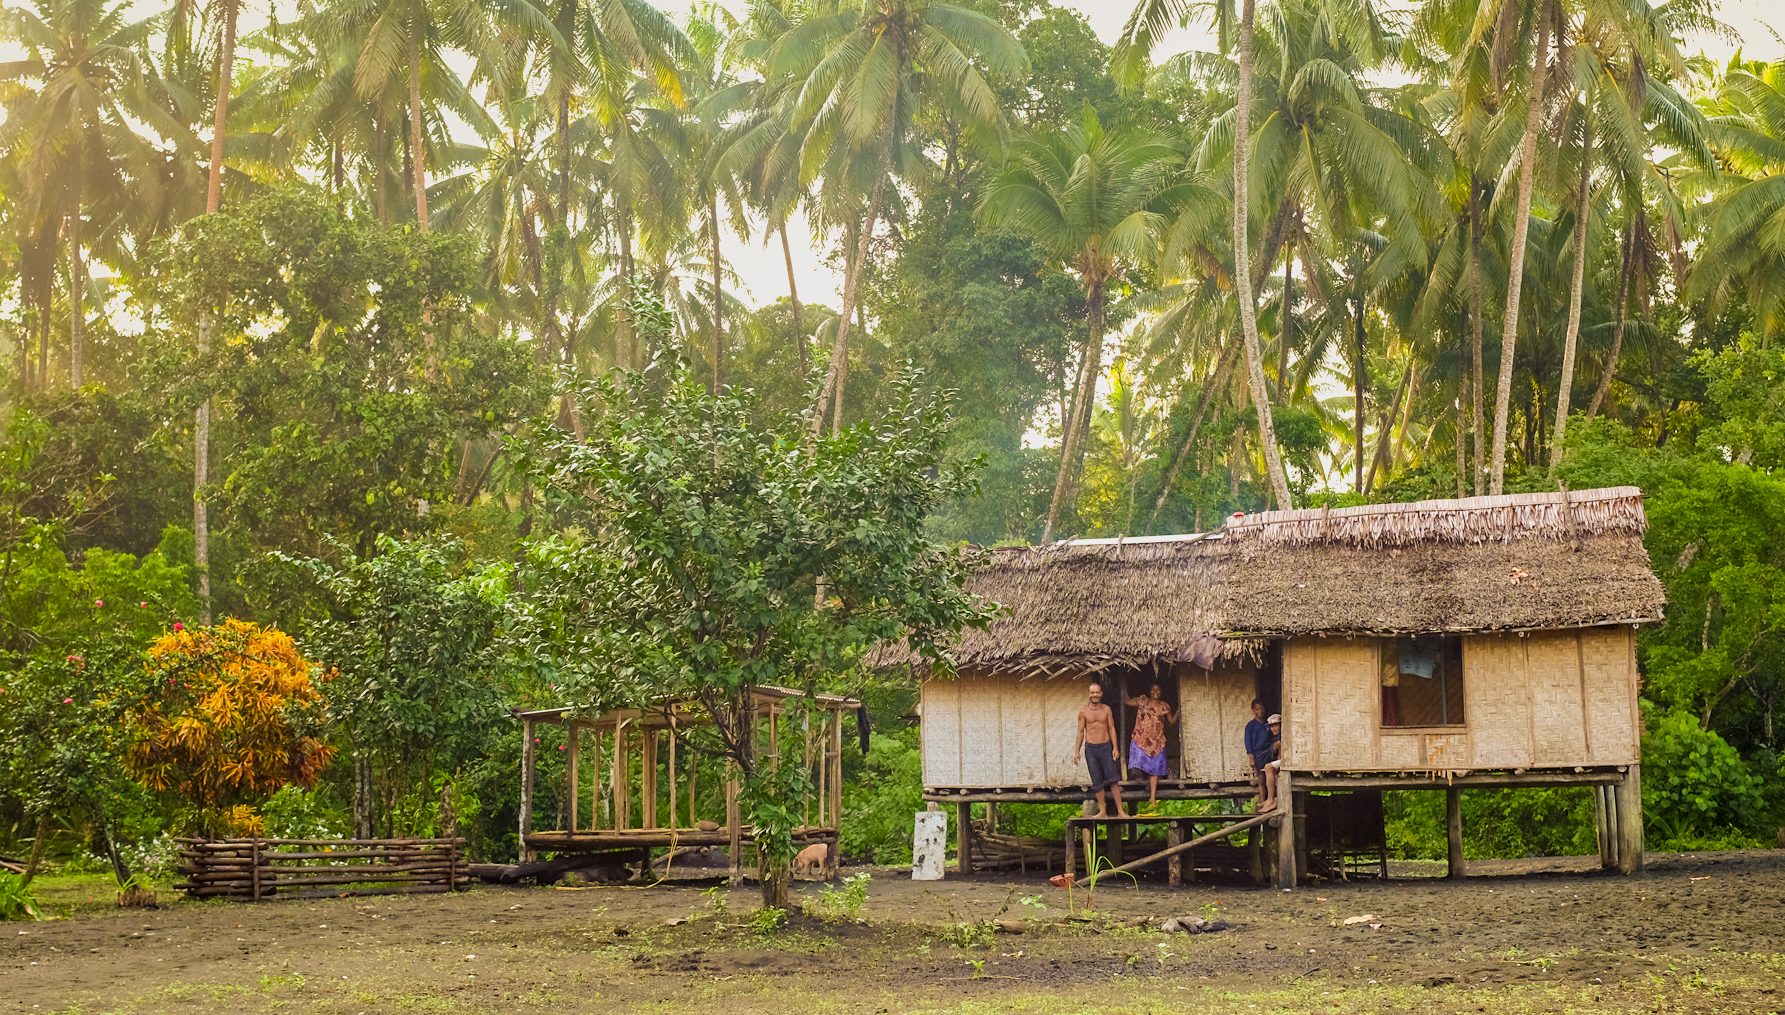 A house with a grass roof stand on stilts, three people from Gadaisu community stand on its steps and in the doorway. Large palm trees fill the background.